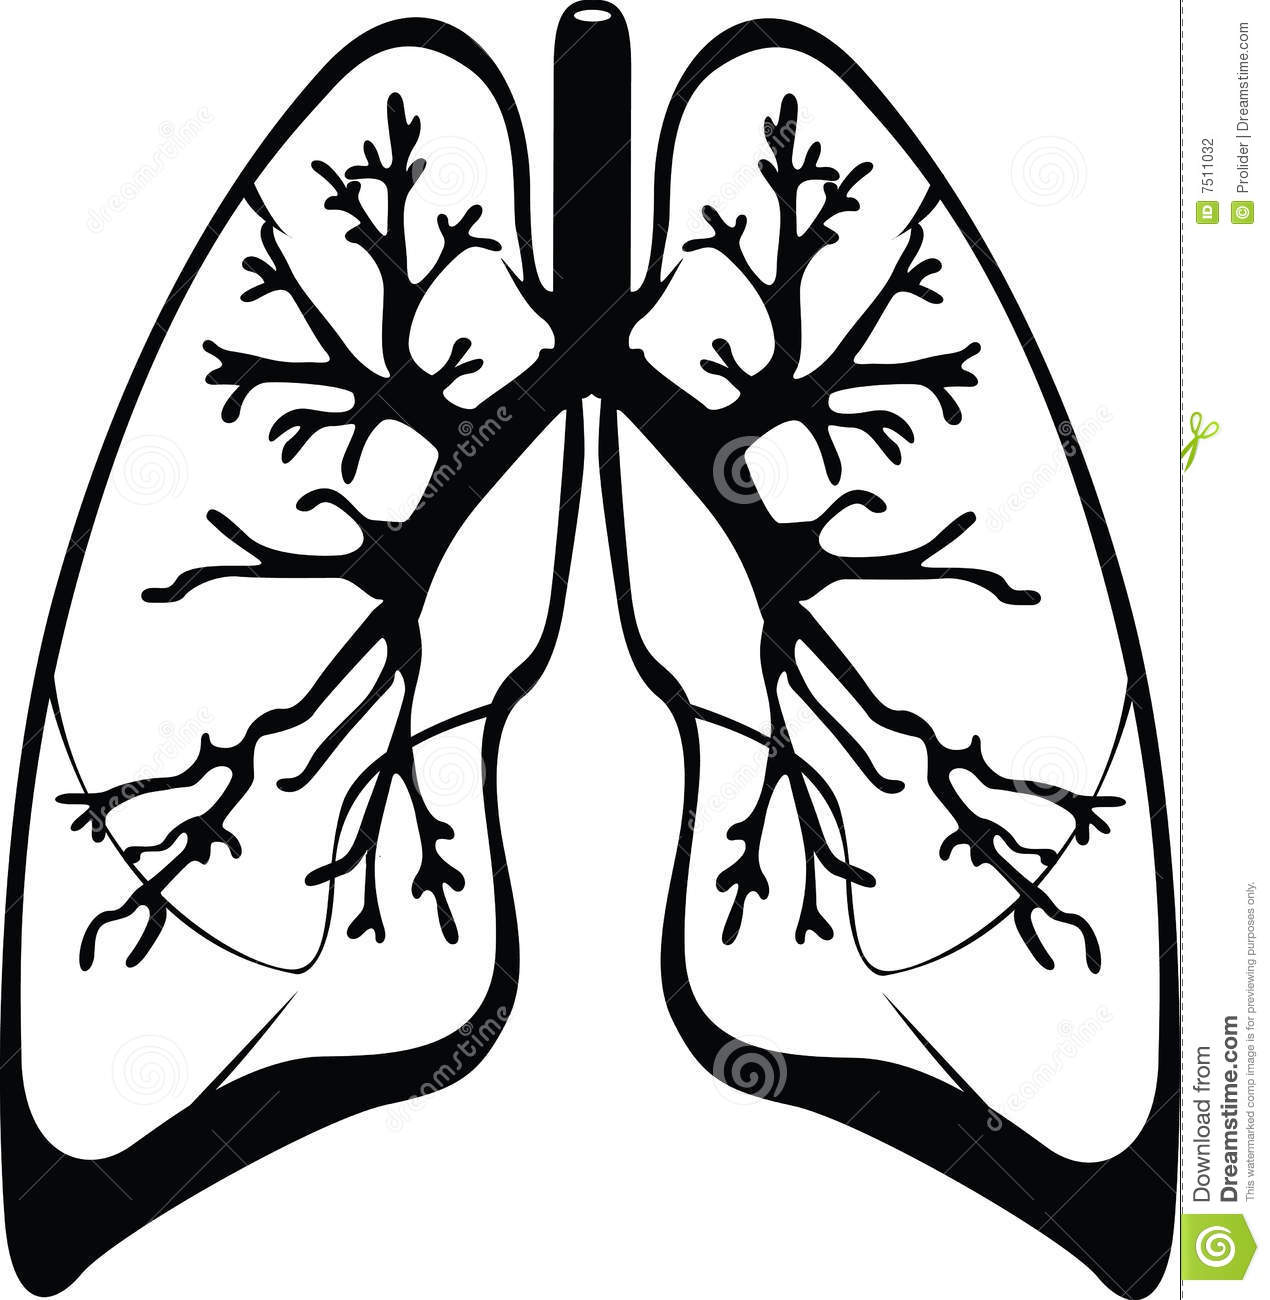 LUNGS CLIPART BLACK AND WHITE Px Image